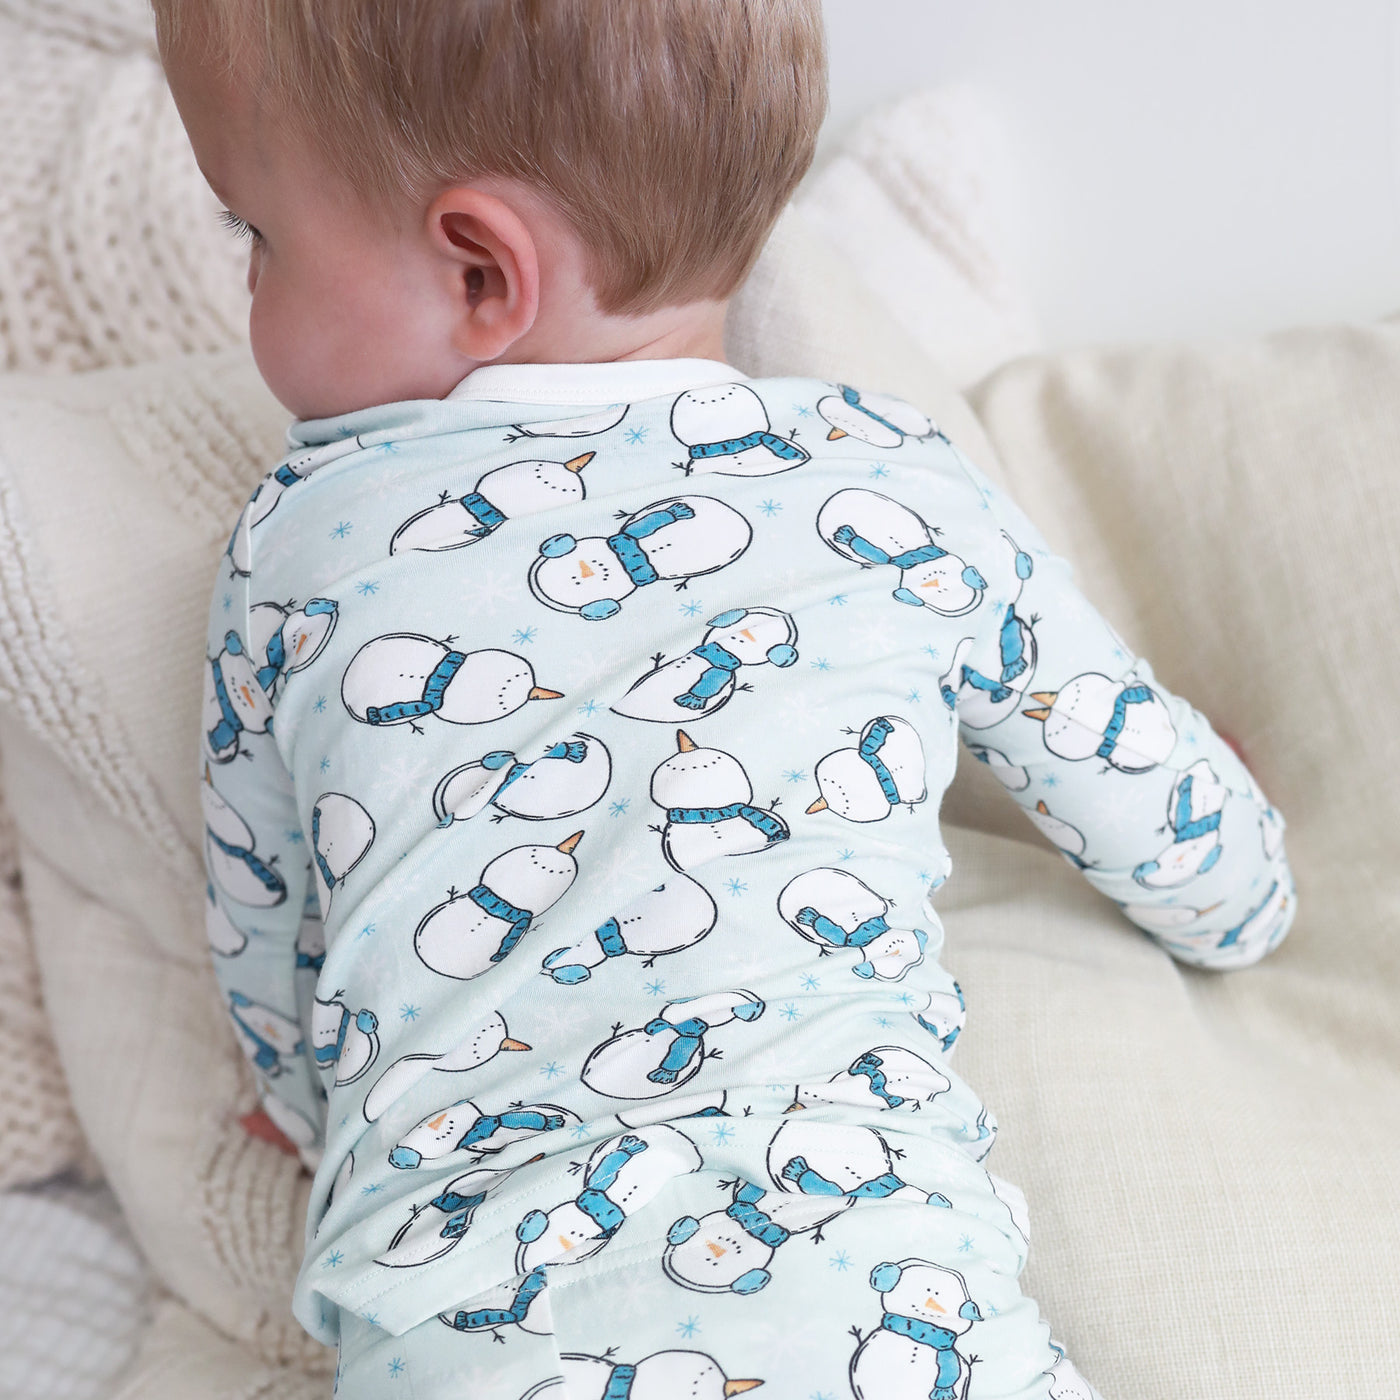 bamboo pajamas for kids blue with snowmen 